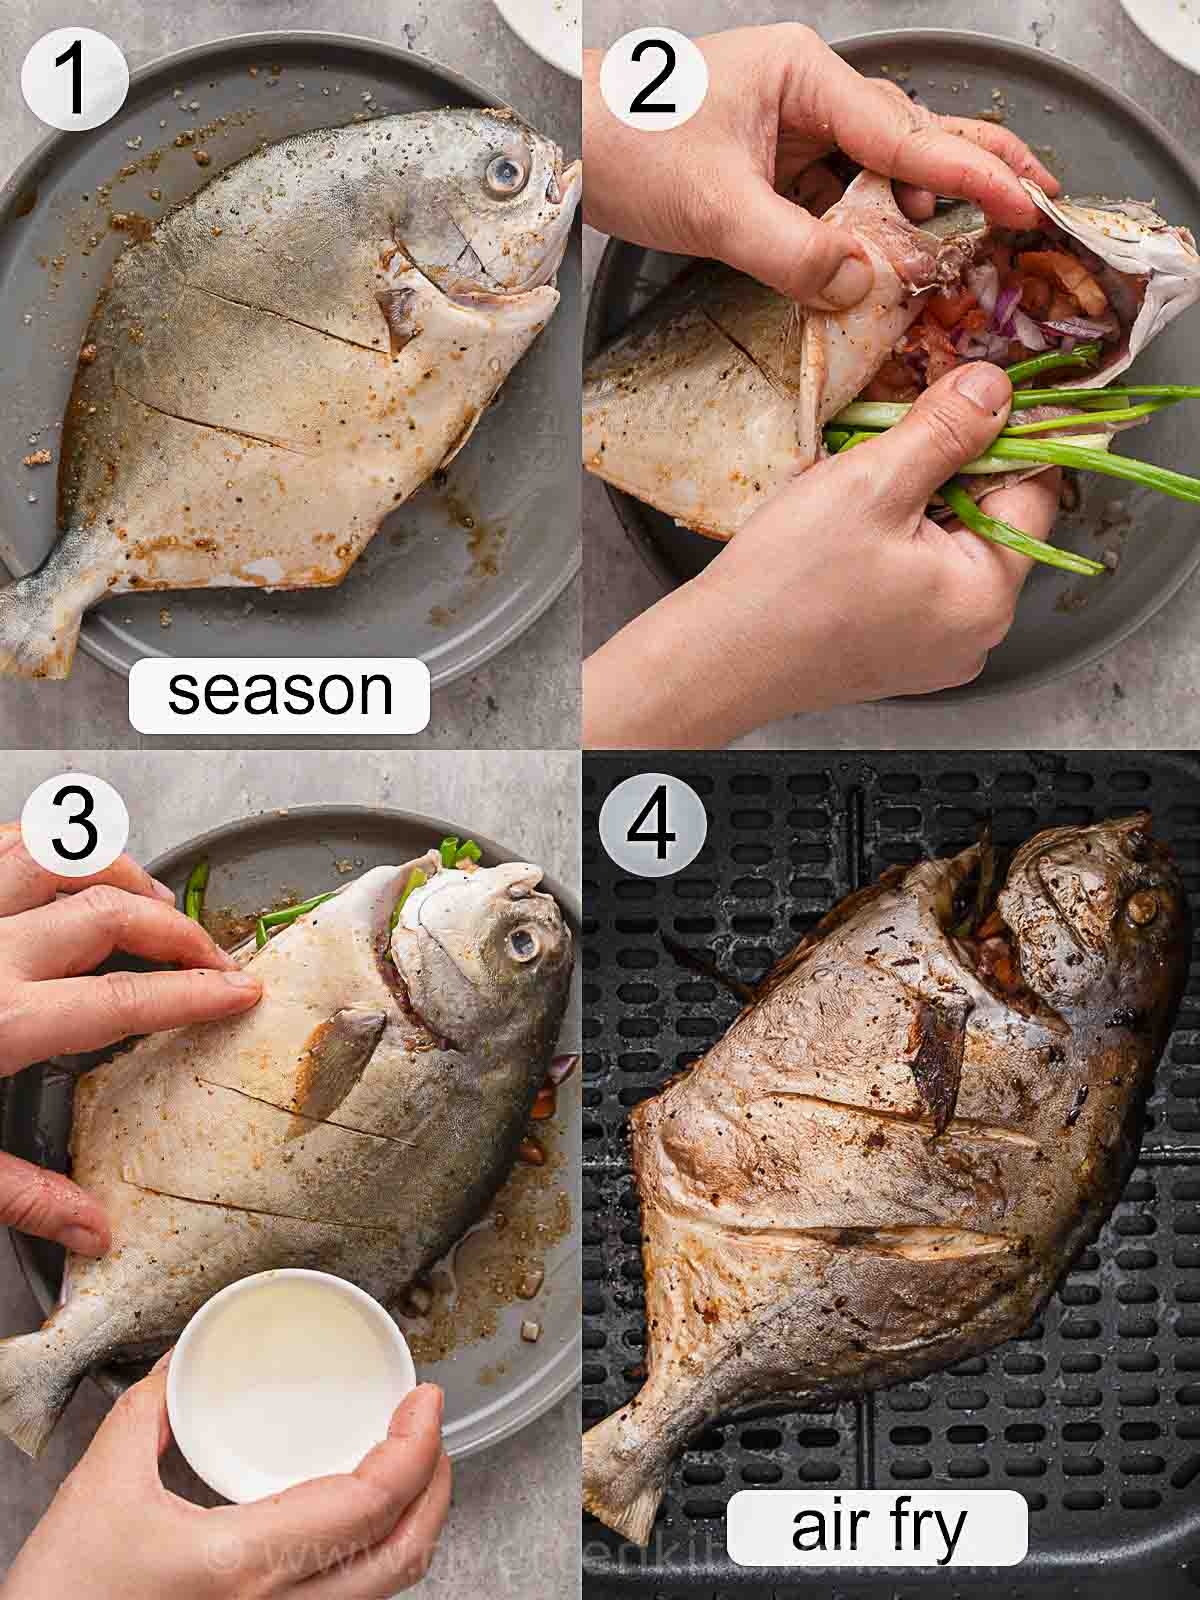 step-by-step process on how to cook grilled pomfret.